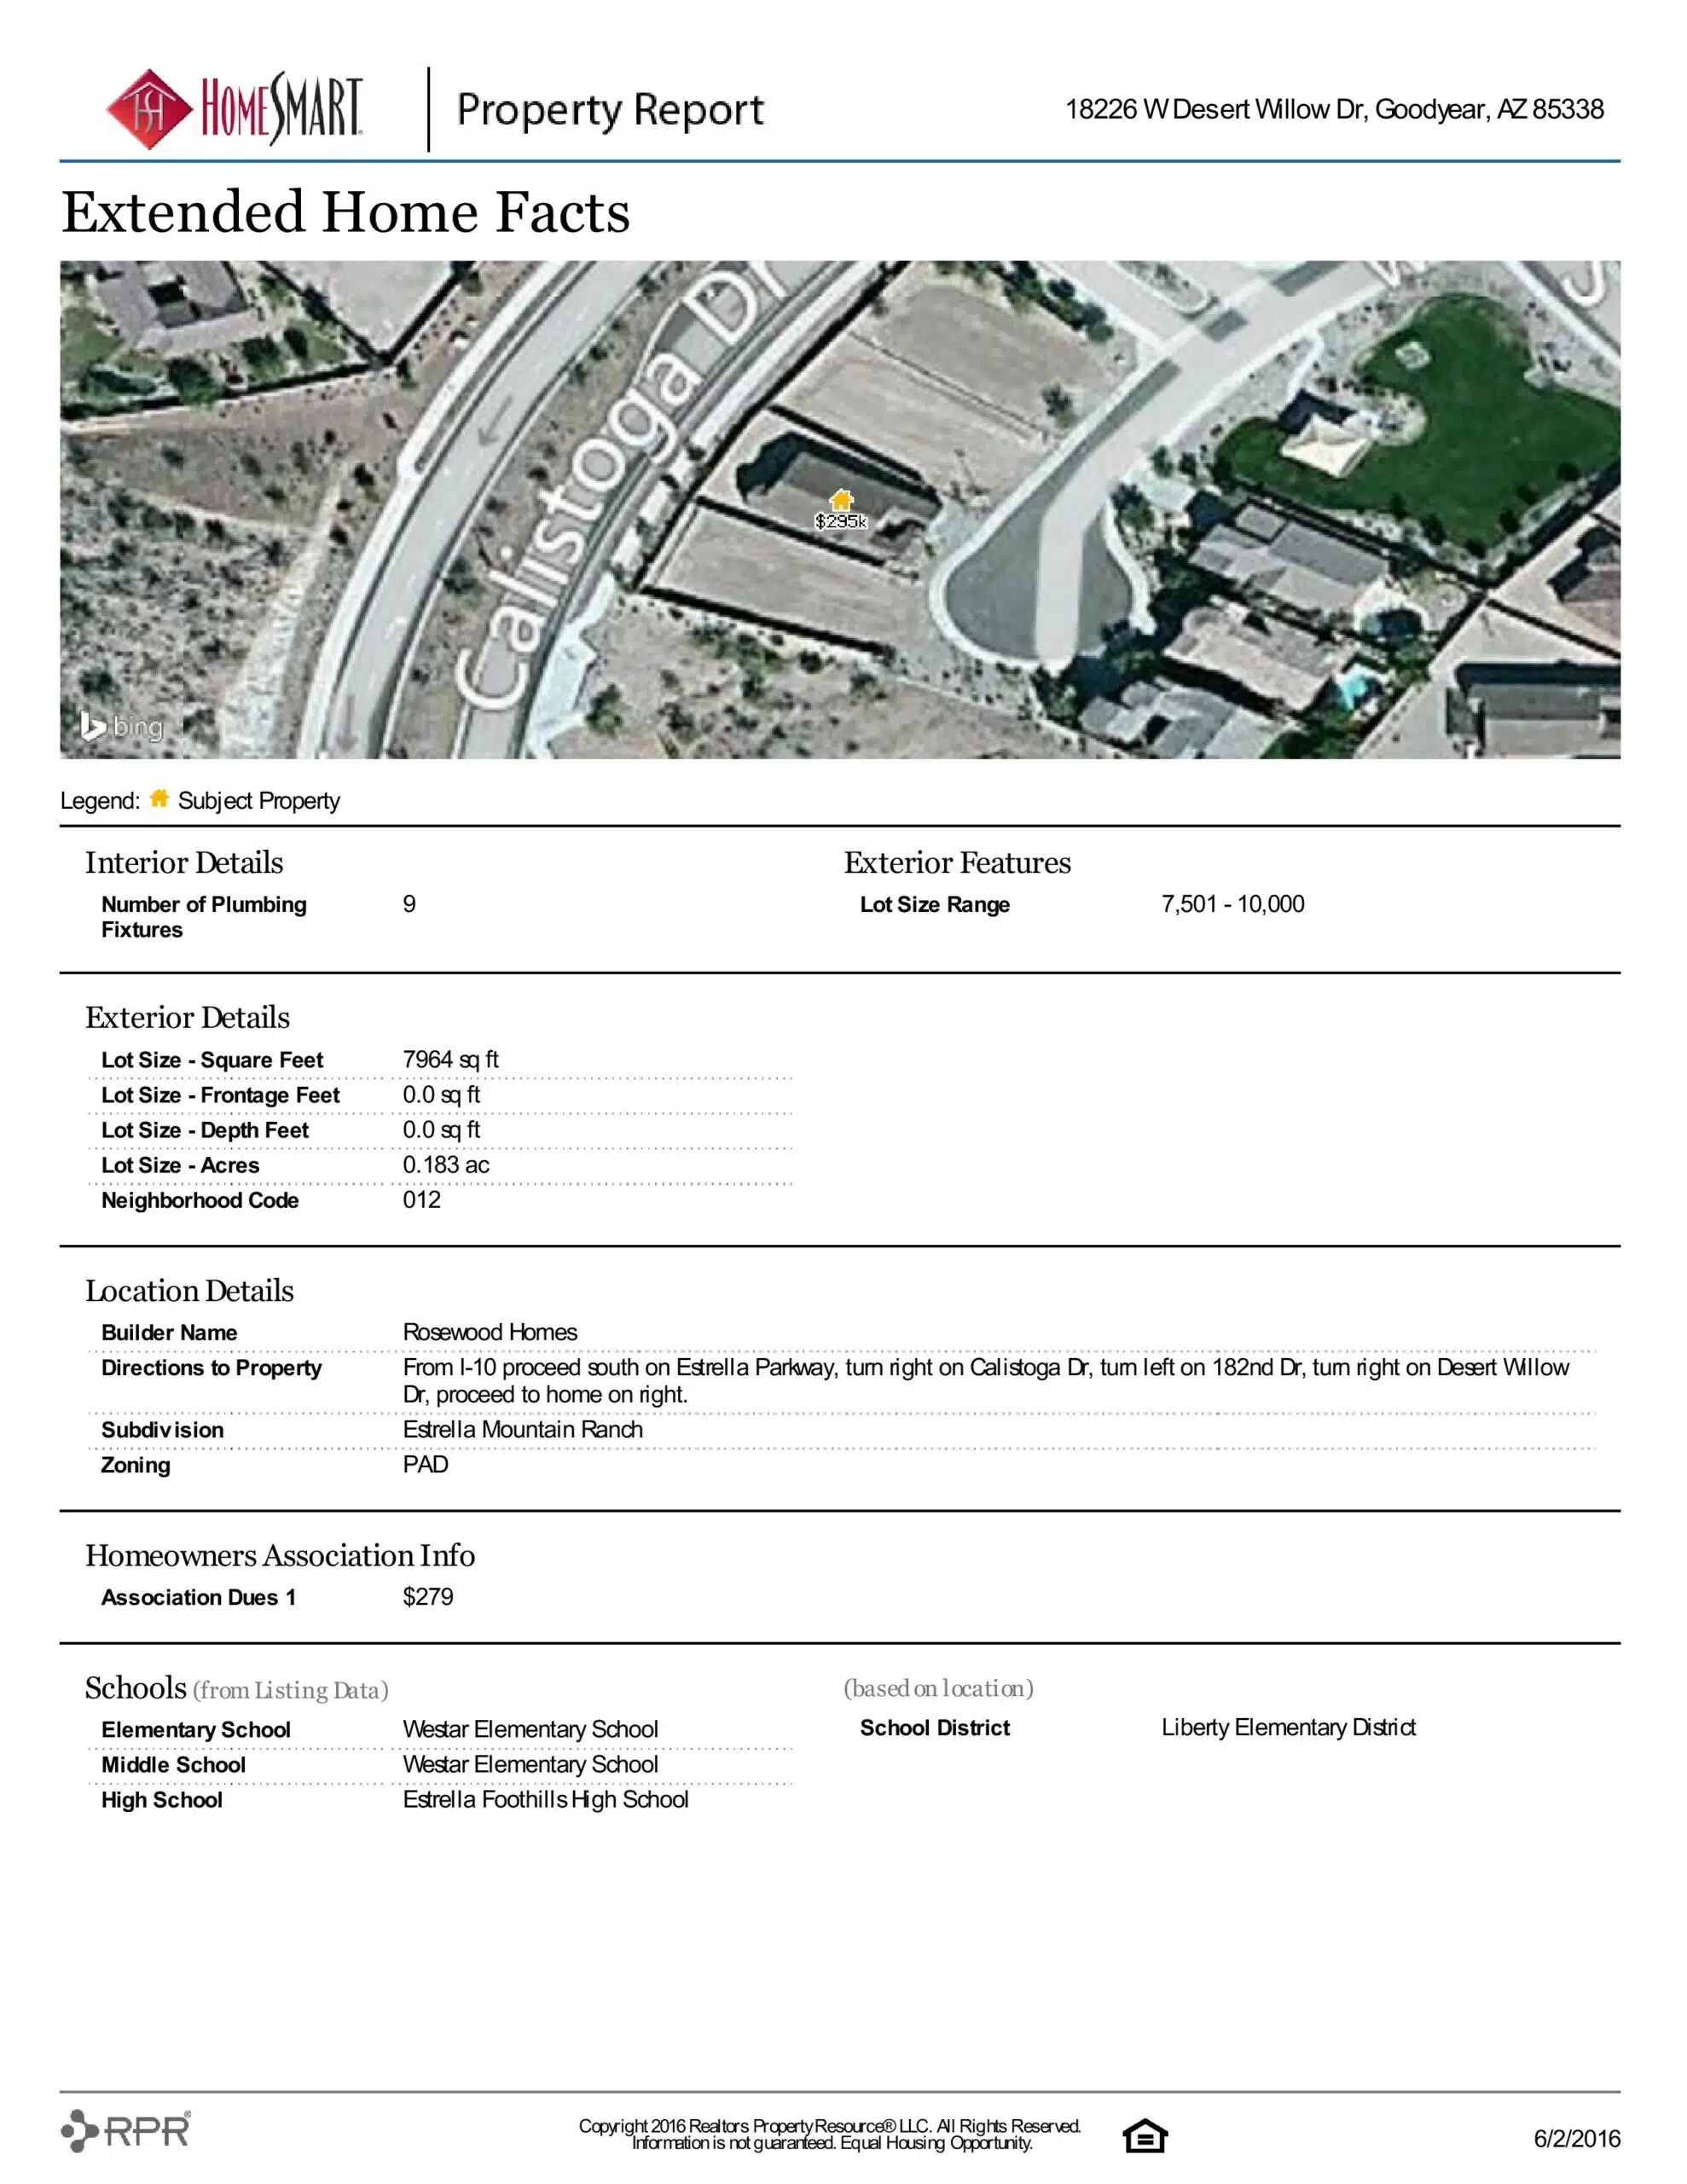 18226 W DESERT WILLOW DR PROPERTY REPORT-page-004